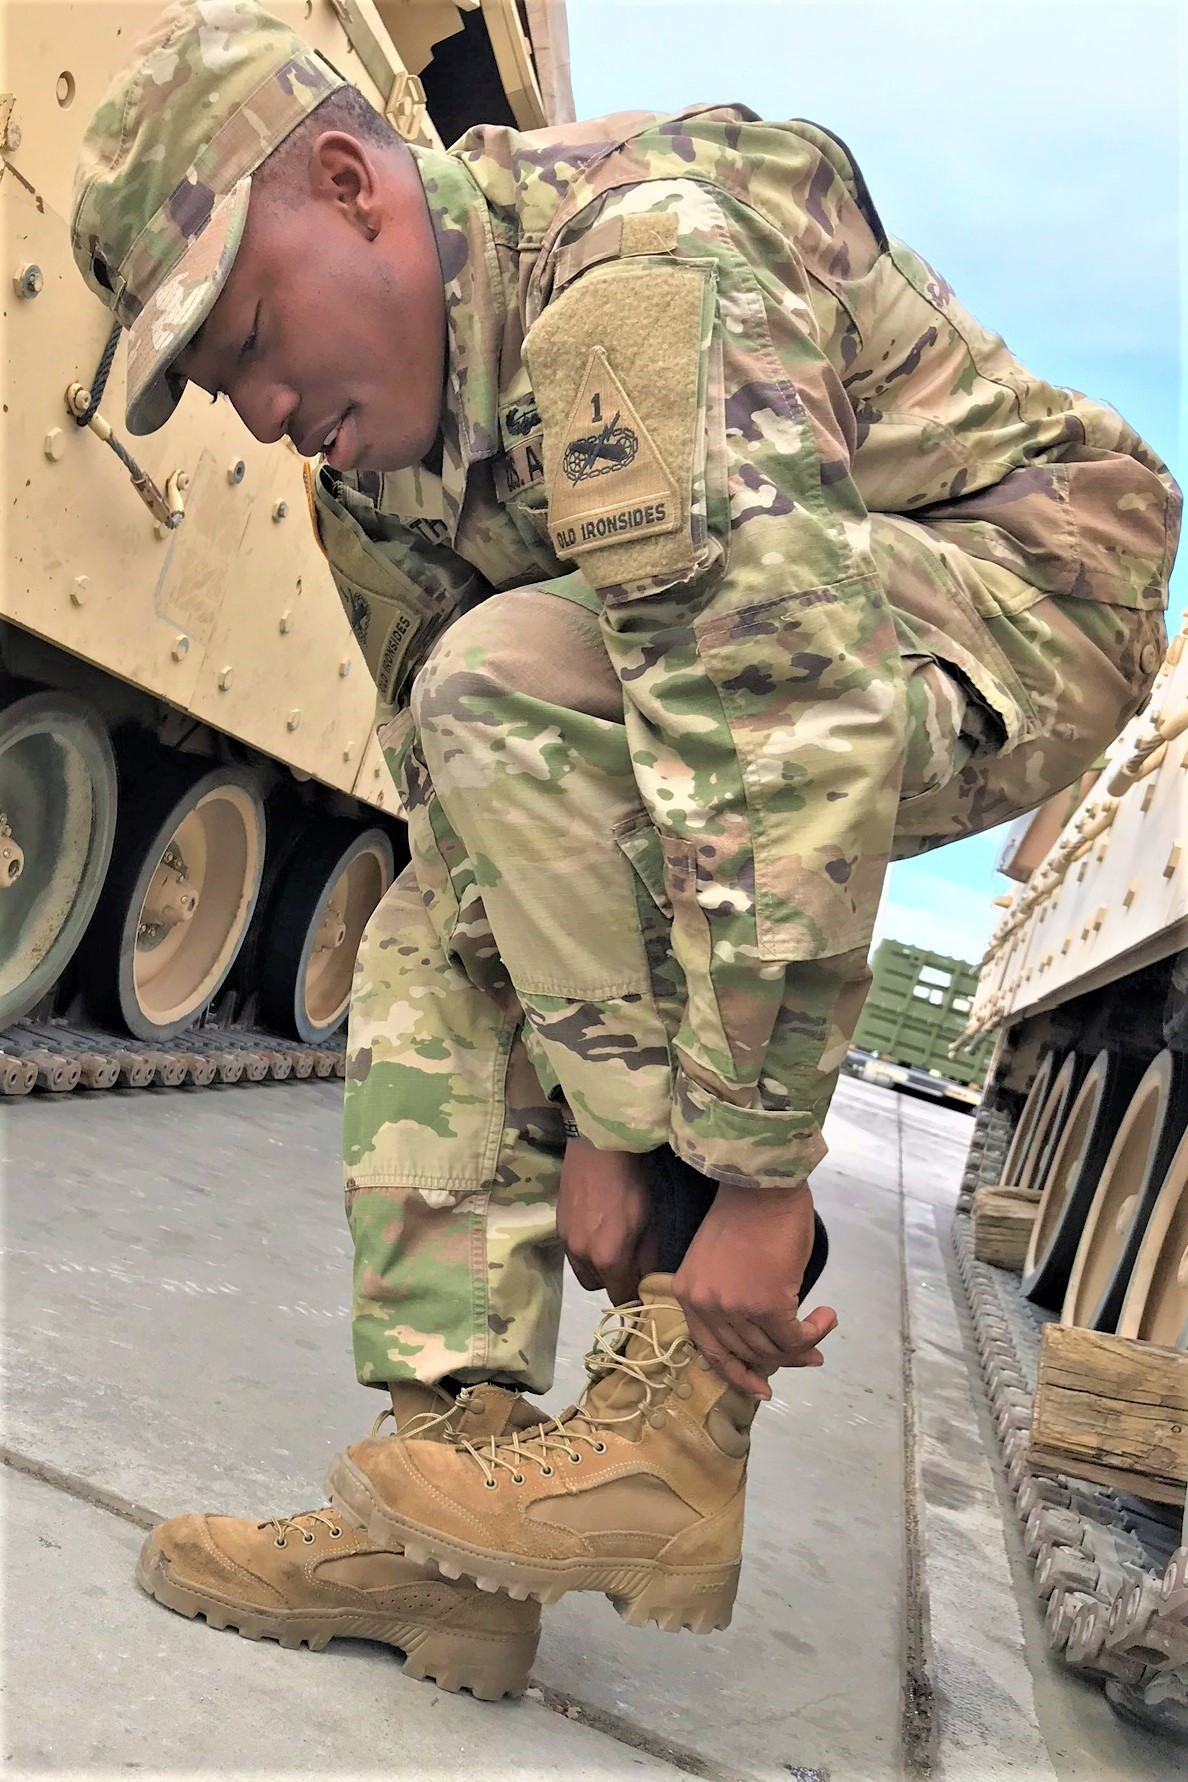 Iron Soldiers Pave The Way In Army Footwear Article The United States Army